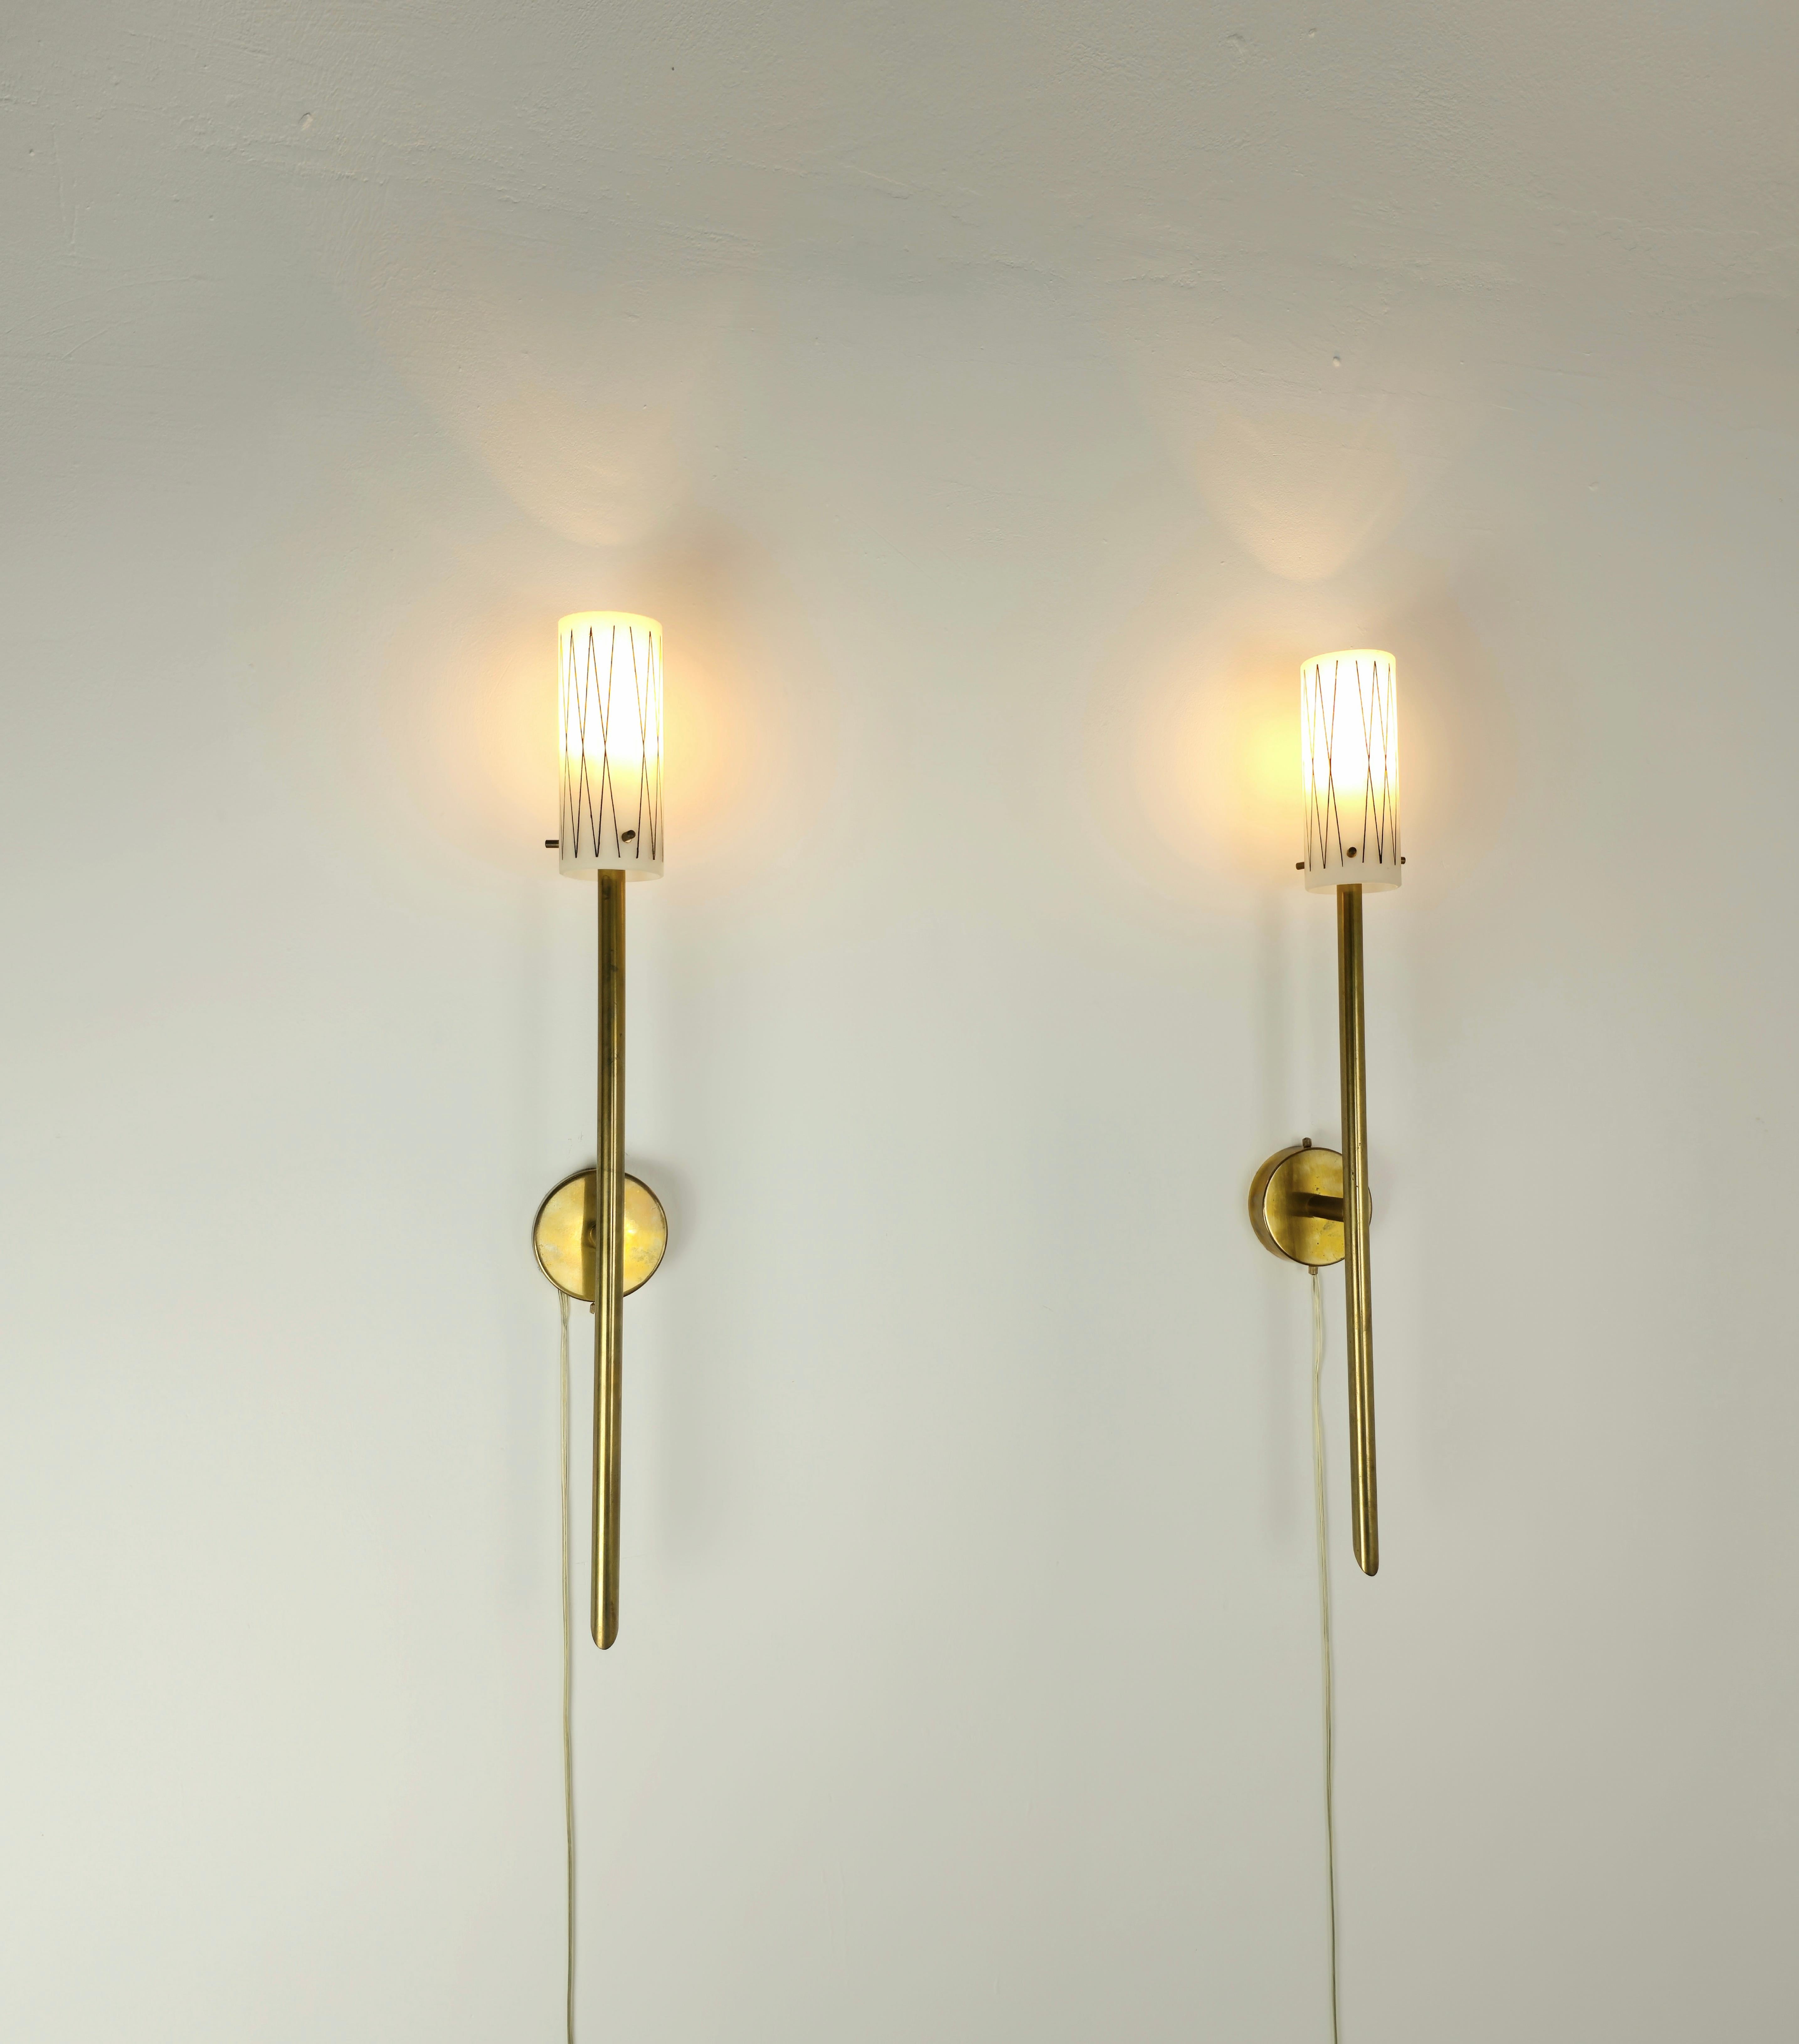 Pair of Wall Lights Sconces Brass Opaline Glass Midcentury Italian Design 1950s  In Good Condition For Sale In Palermo, IT